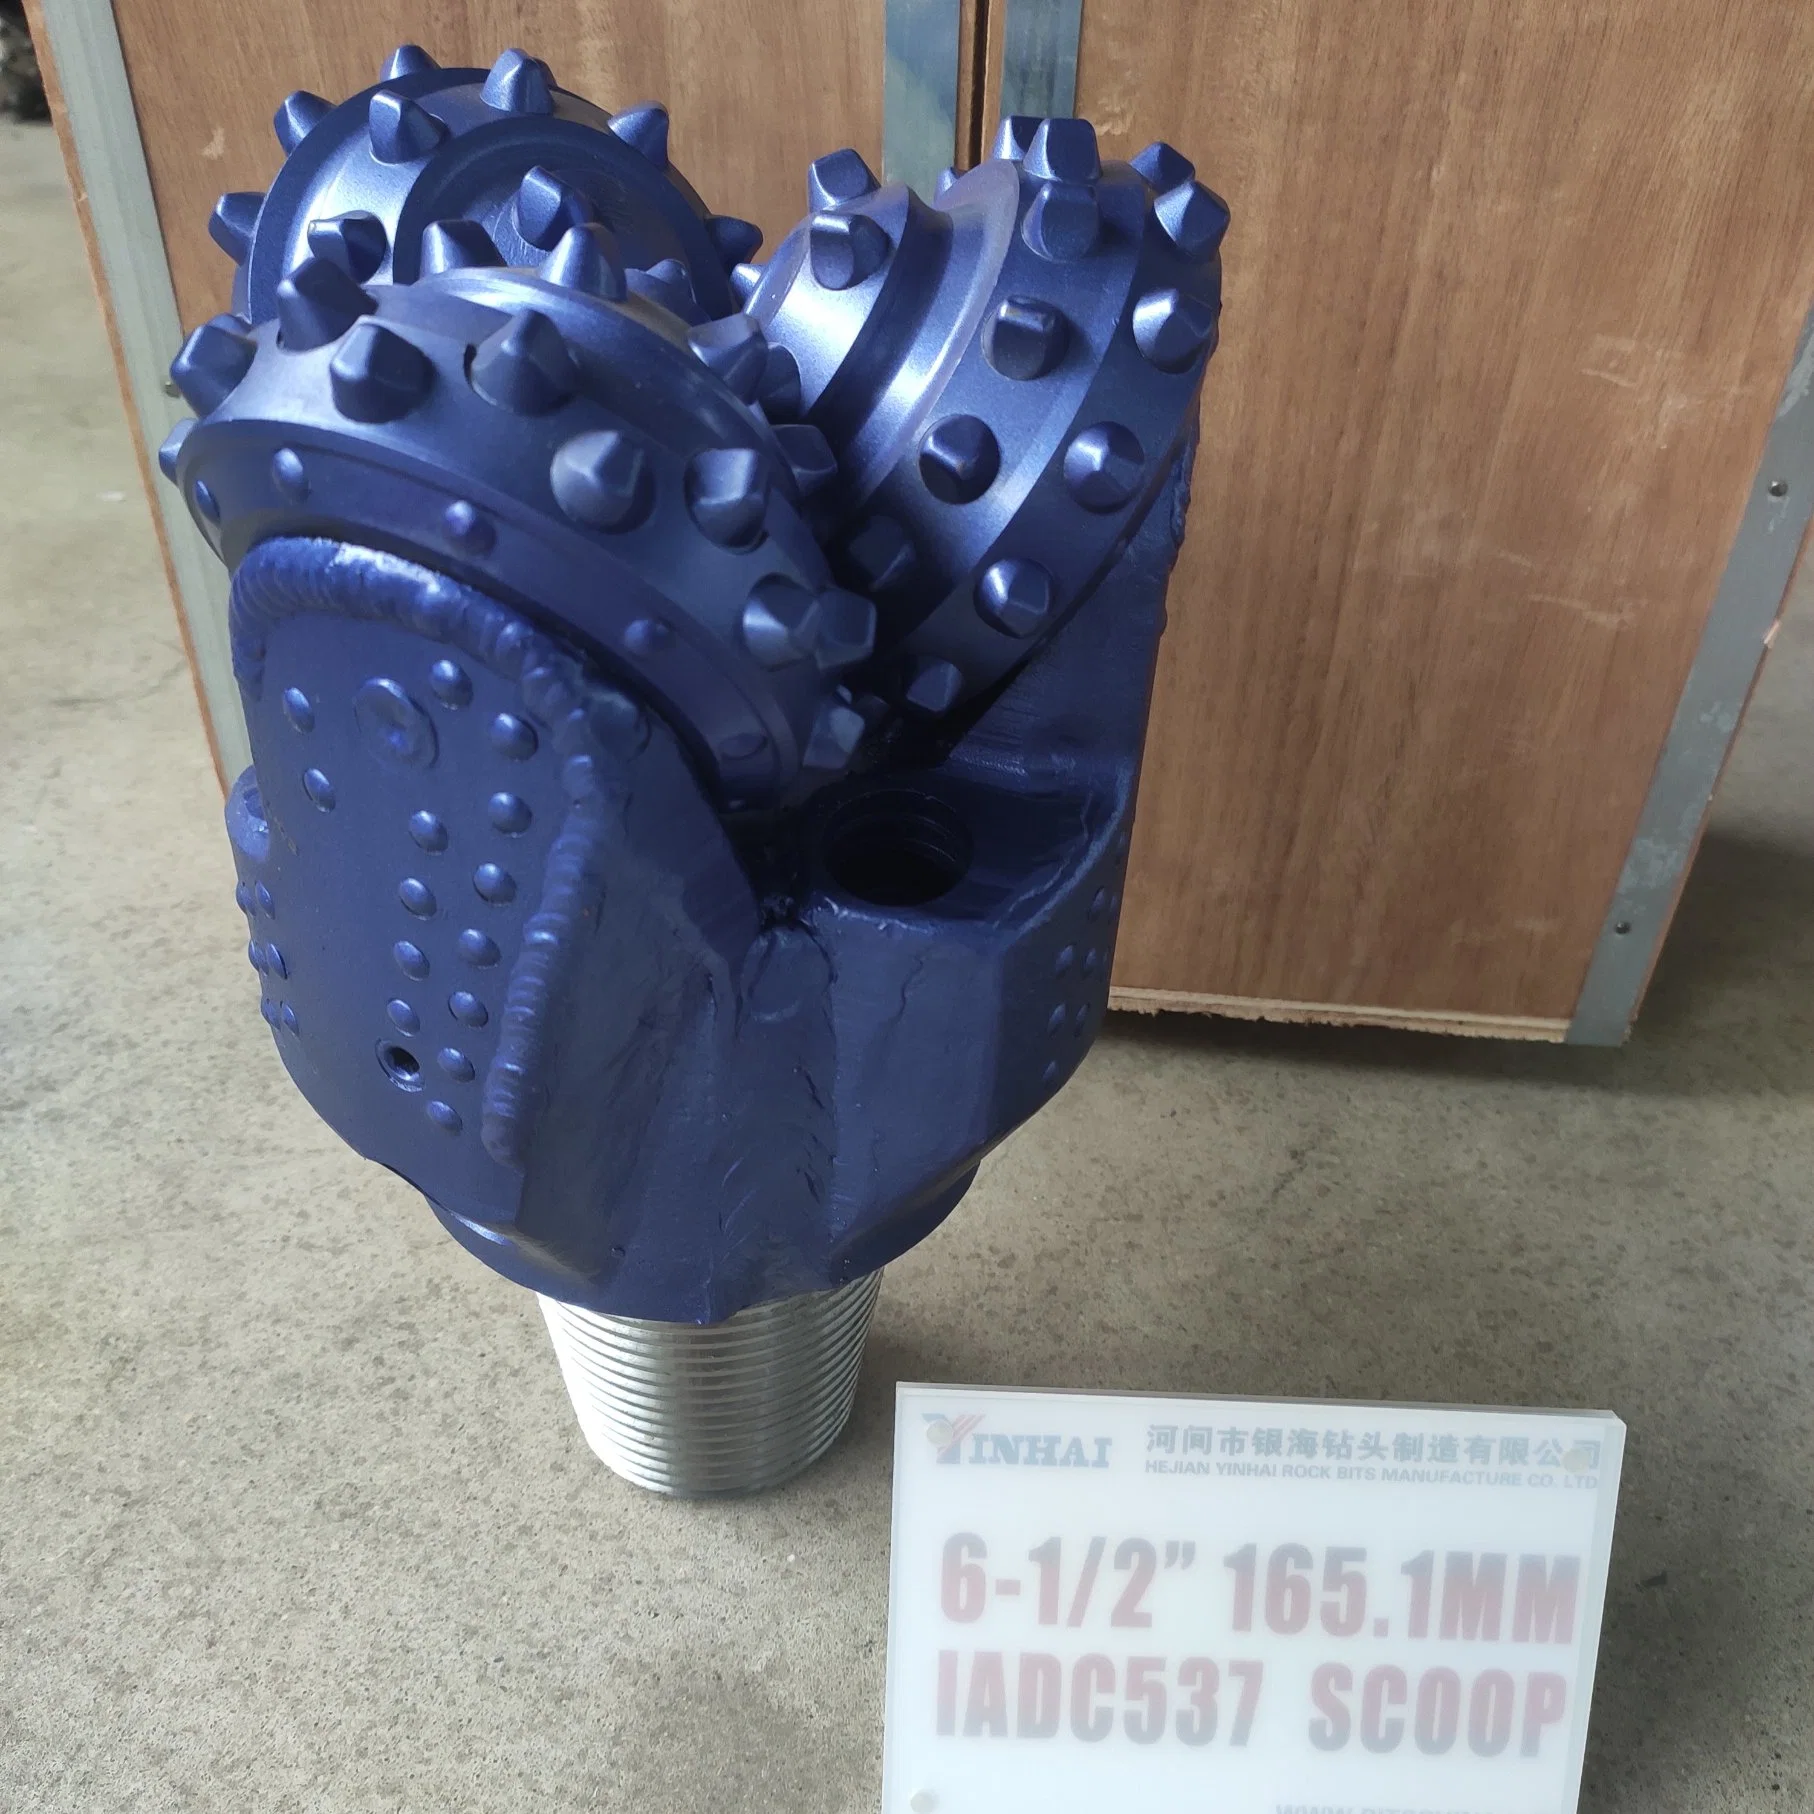 6 1/2 Inch IADC537 Tri-Cone Bit/Roller Cone Bit for Water Well Drilling